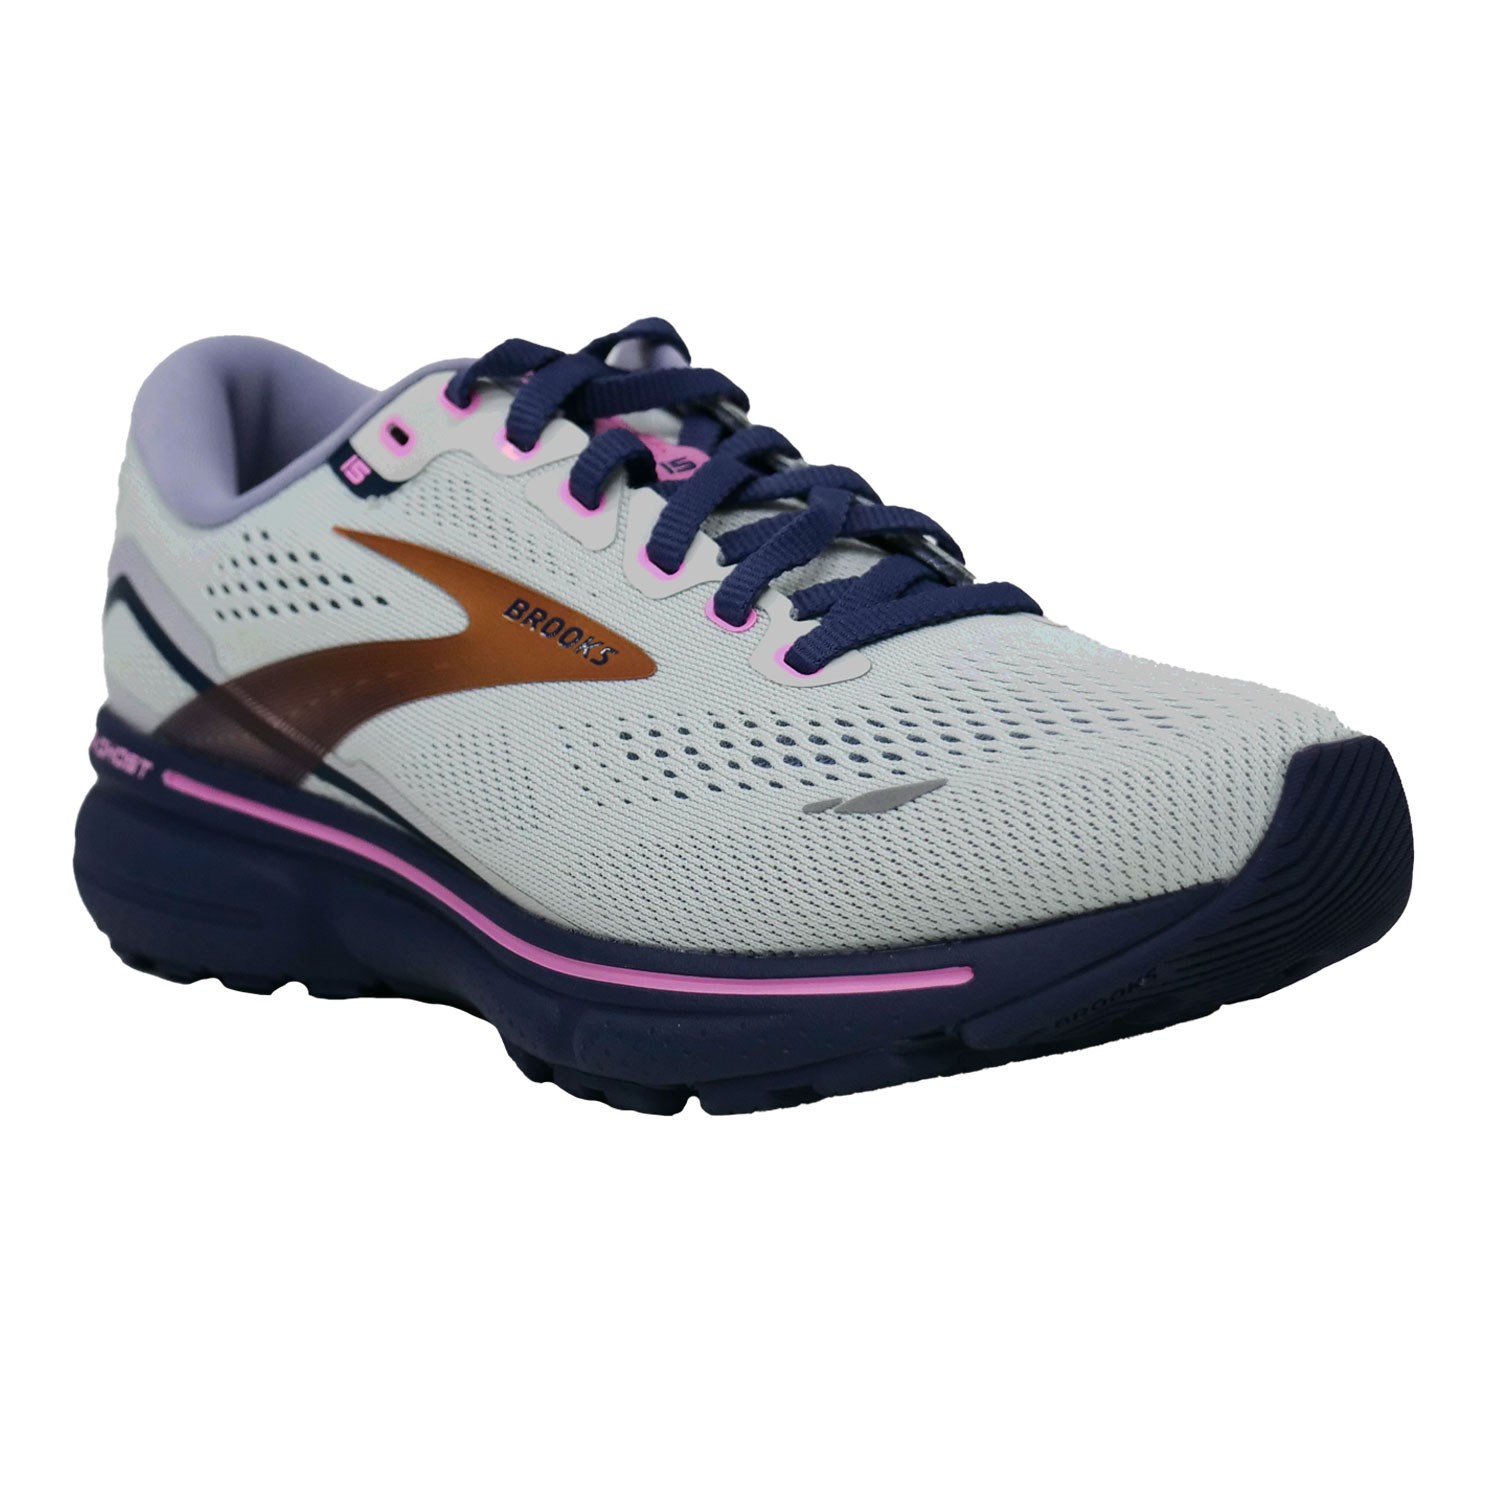 Brooks Ghost 15 - Womens Running Shoes - Spa Blue/Neo Pink/Copper ...